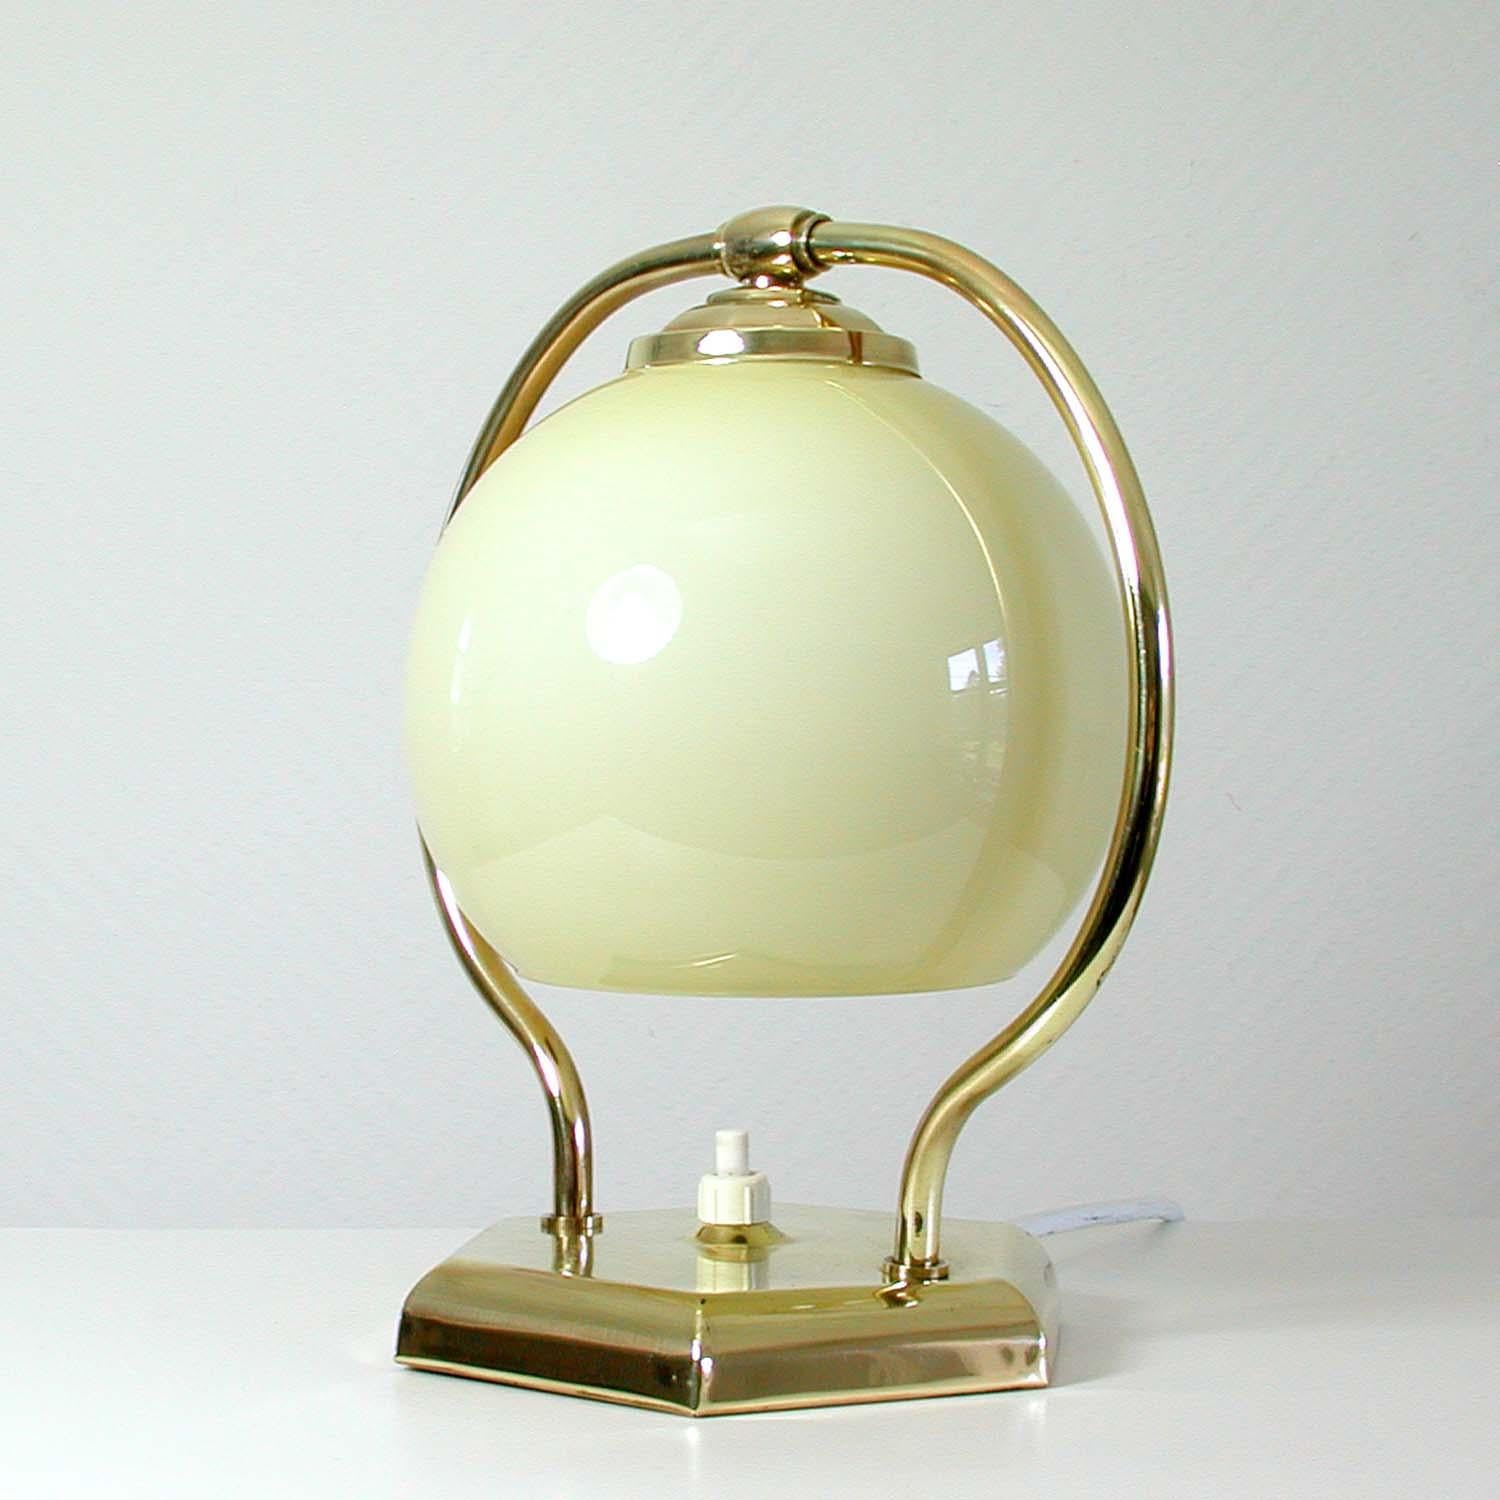 This vintage table or bedside lamp was made in Germany in the 1930s during the Bauhaus period. It is made of polished brass and has got an adjustable lamp shade in opaline glass.